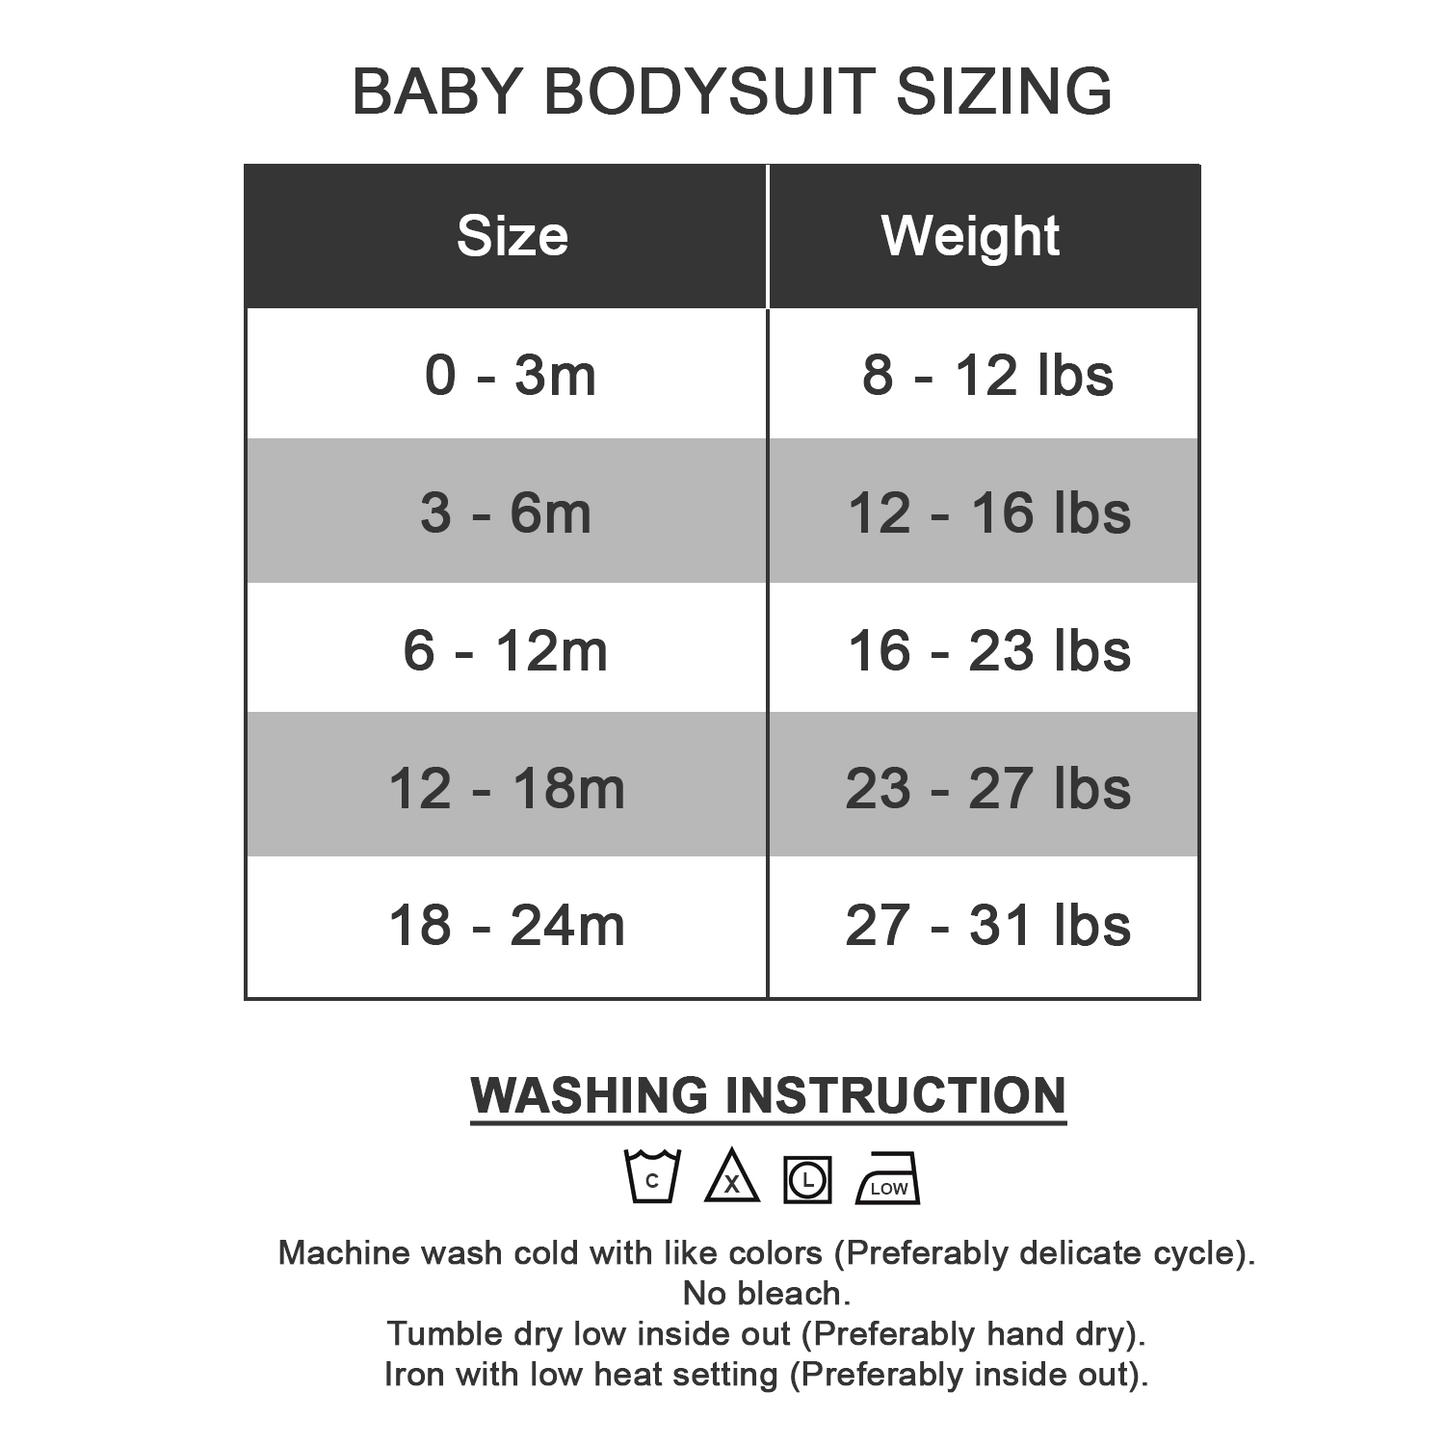 [Personalized] Endanzoo Organic Long Sleeve Baby Bodysuit - Someone in Calgary Loves You